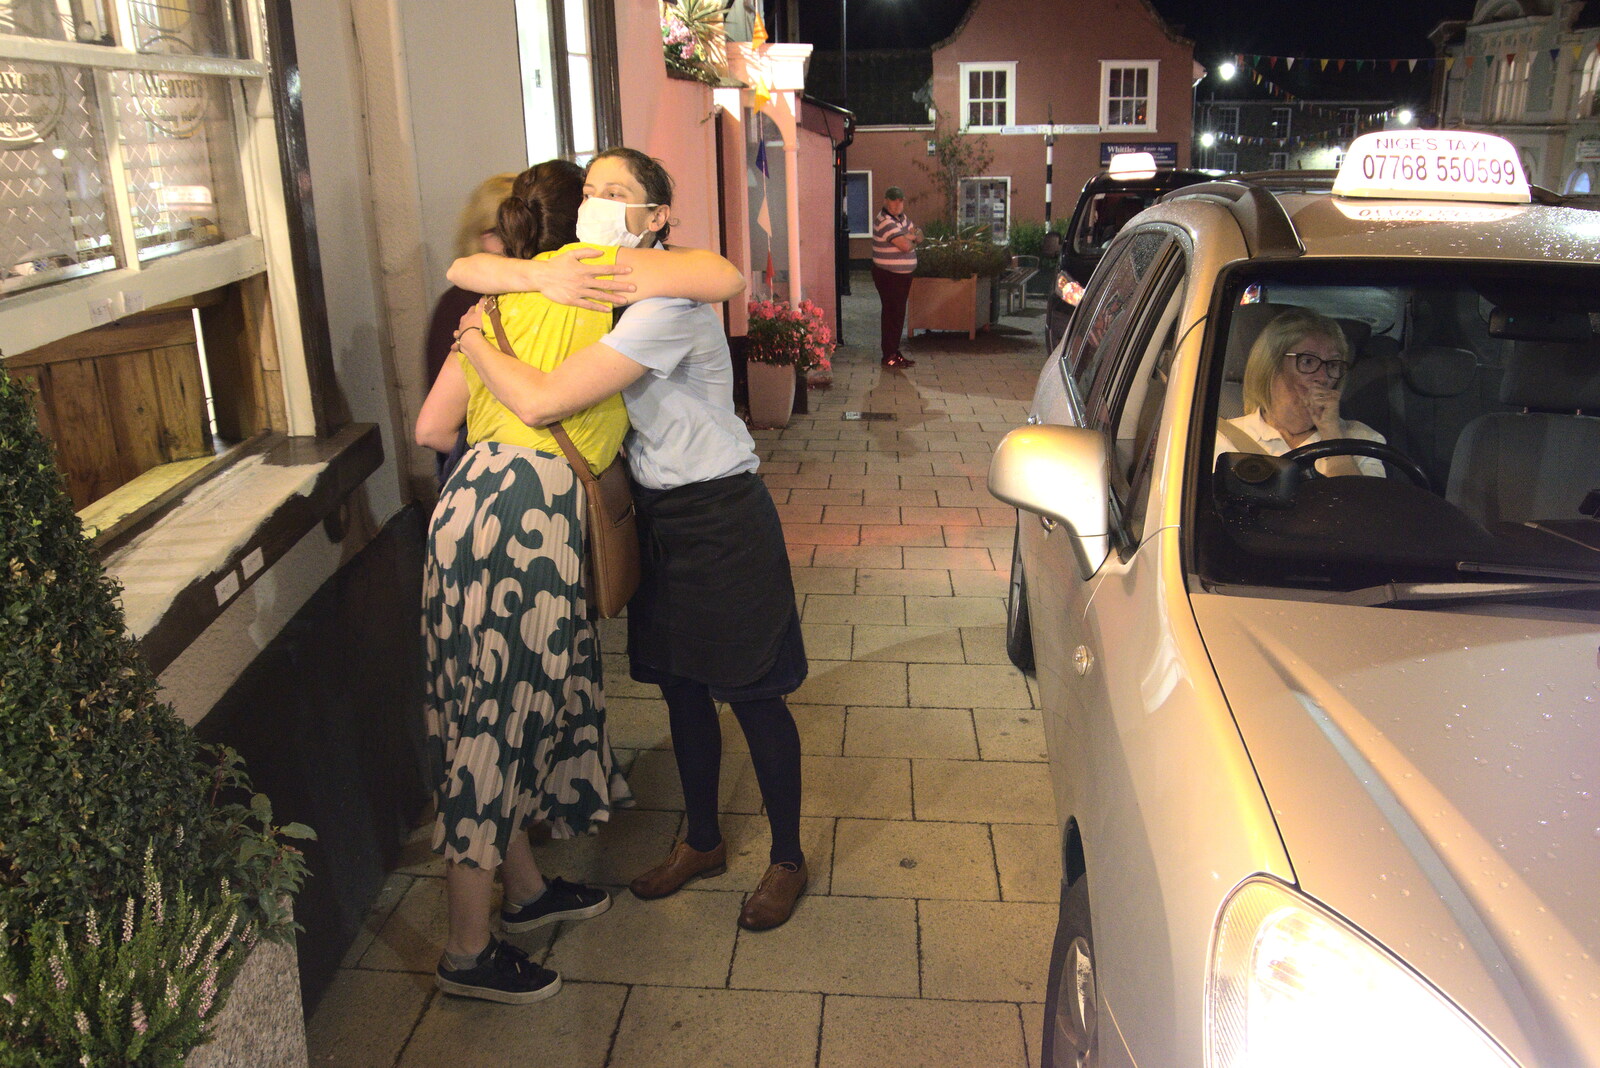 The Last Weavers Ever, Market Hill, Diss, Norfolk - 10th September 2021: Isobel and Katrina have a hug